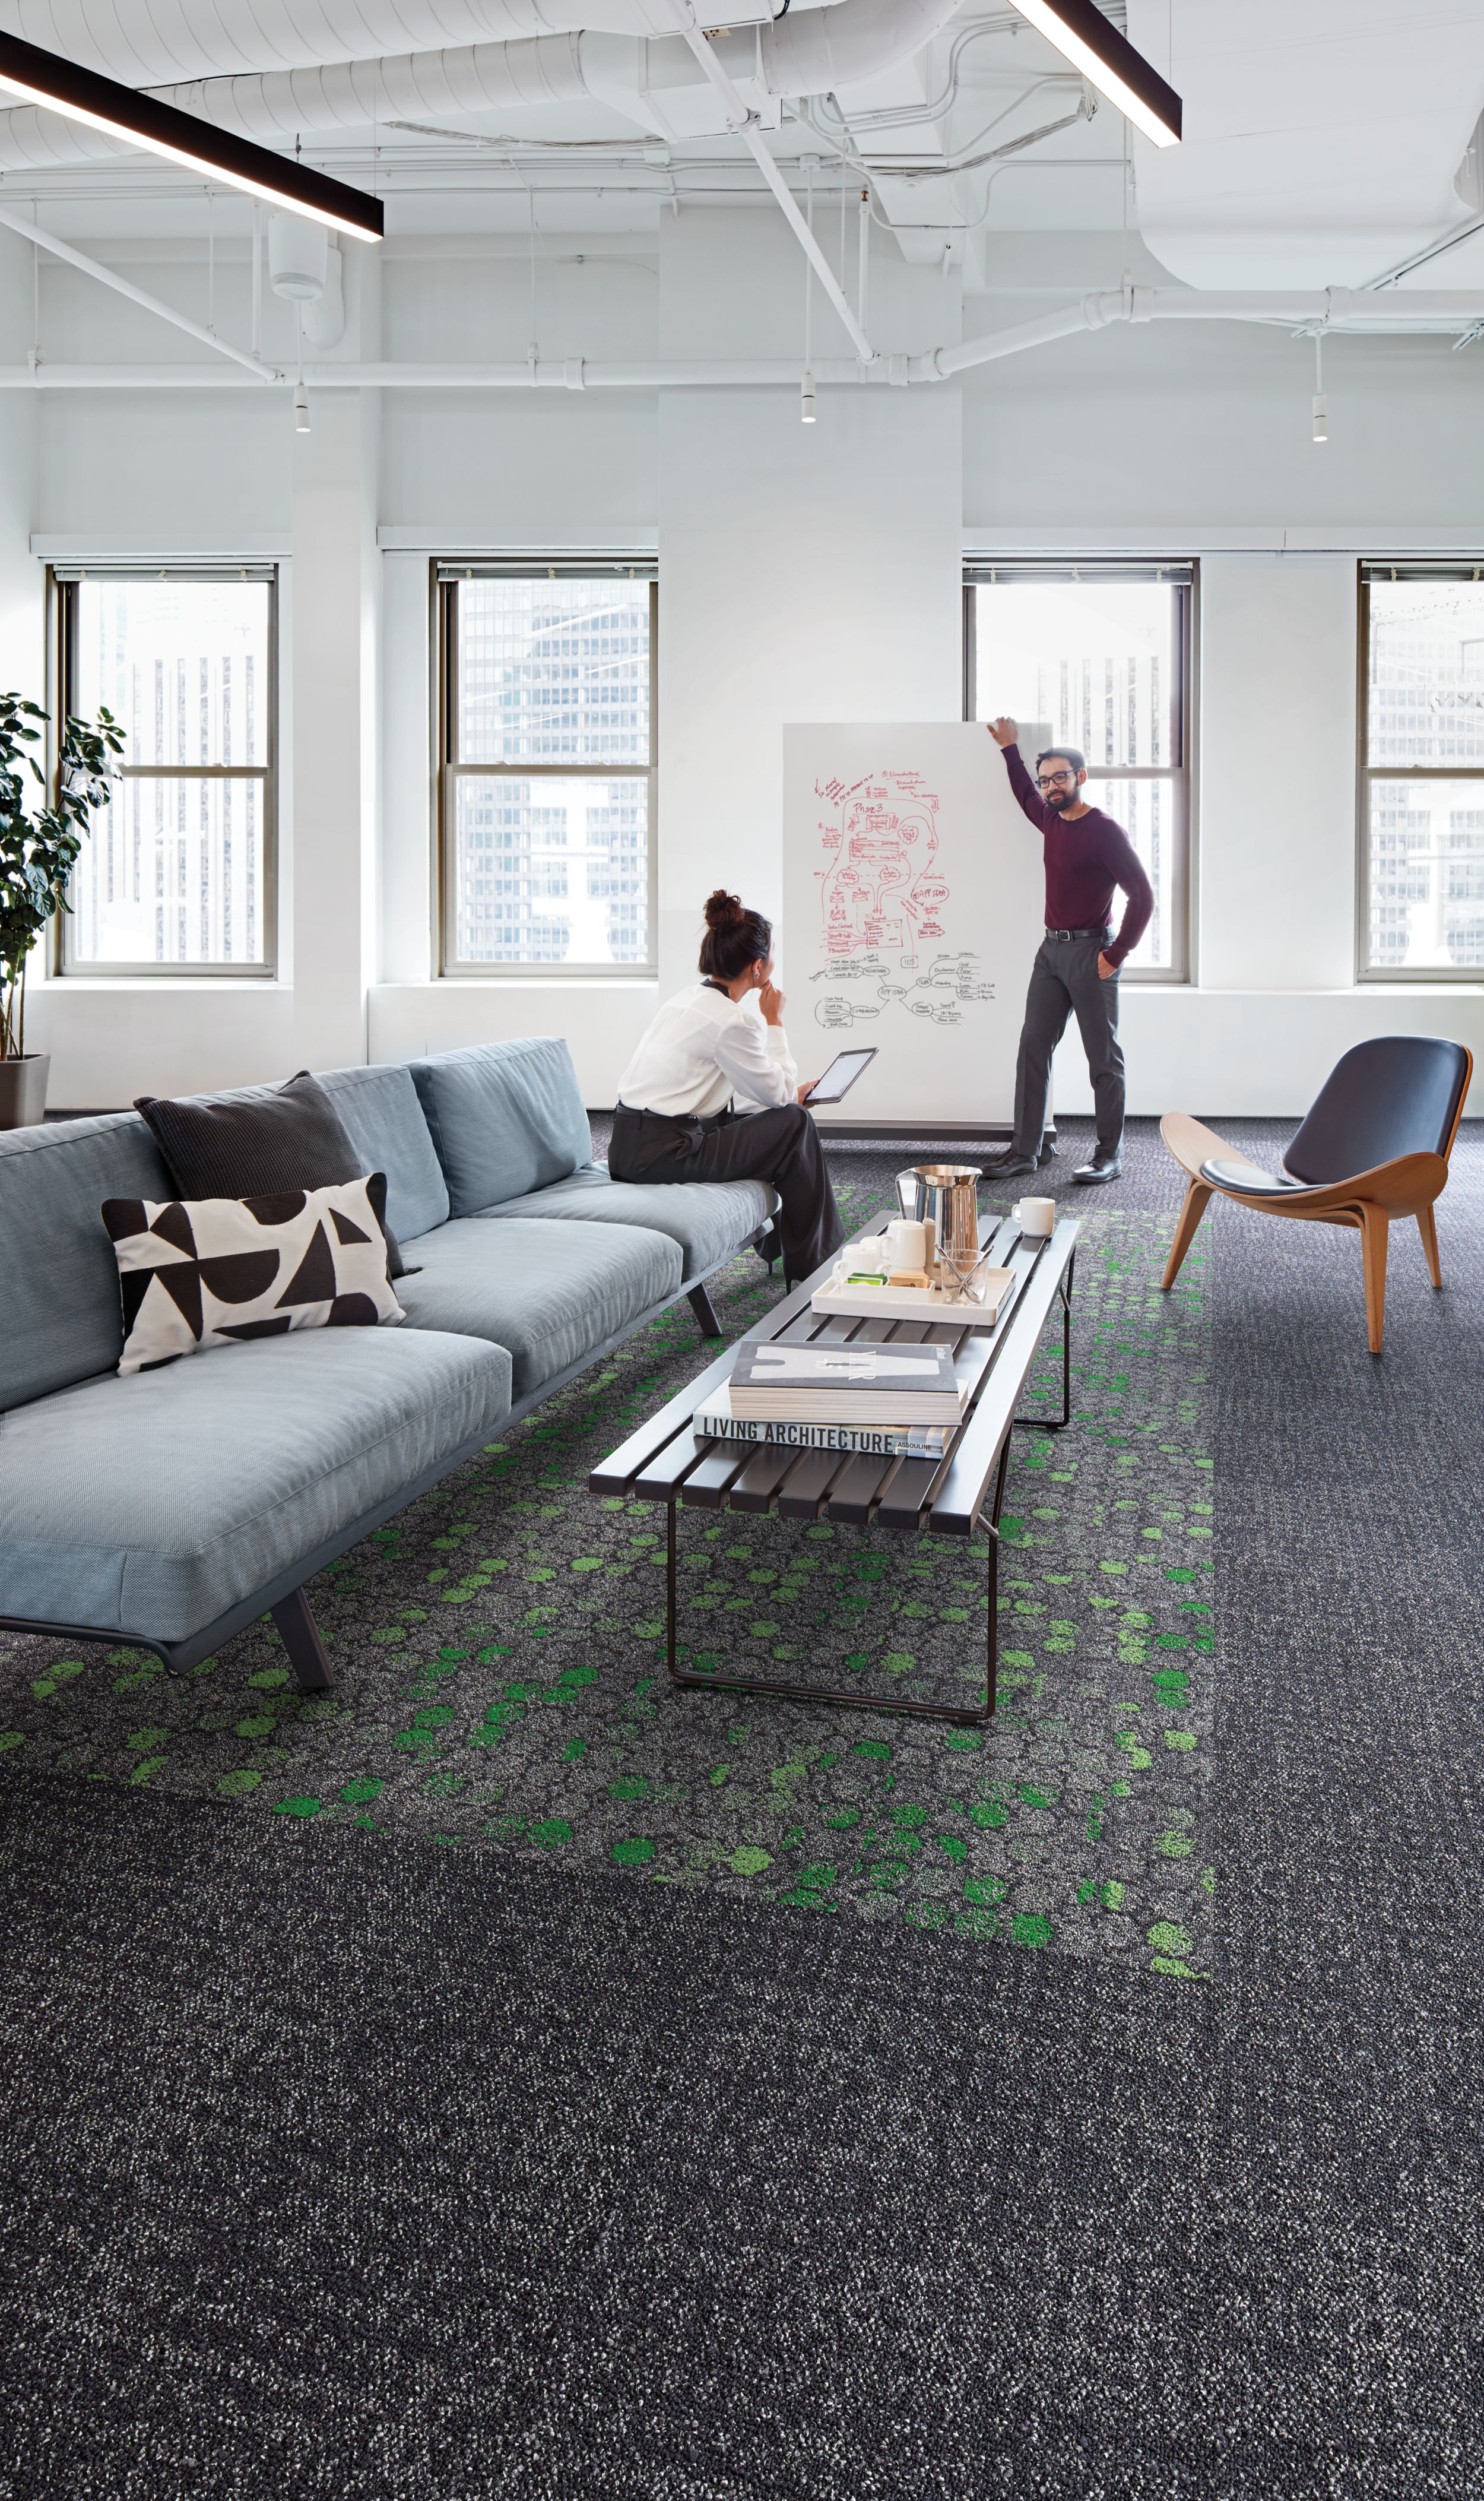 Interface Broome Street and Wheler Street in open office area with people imagen número 5